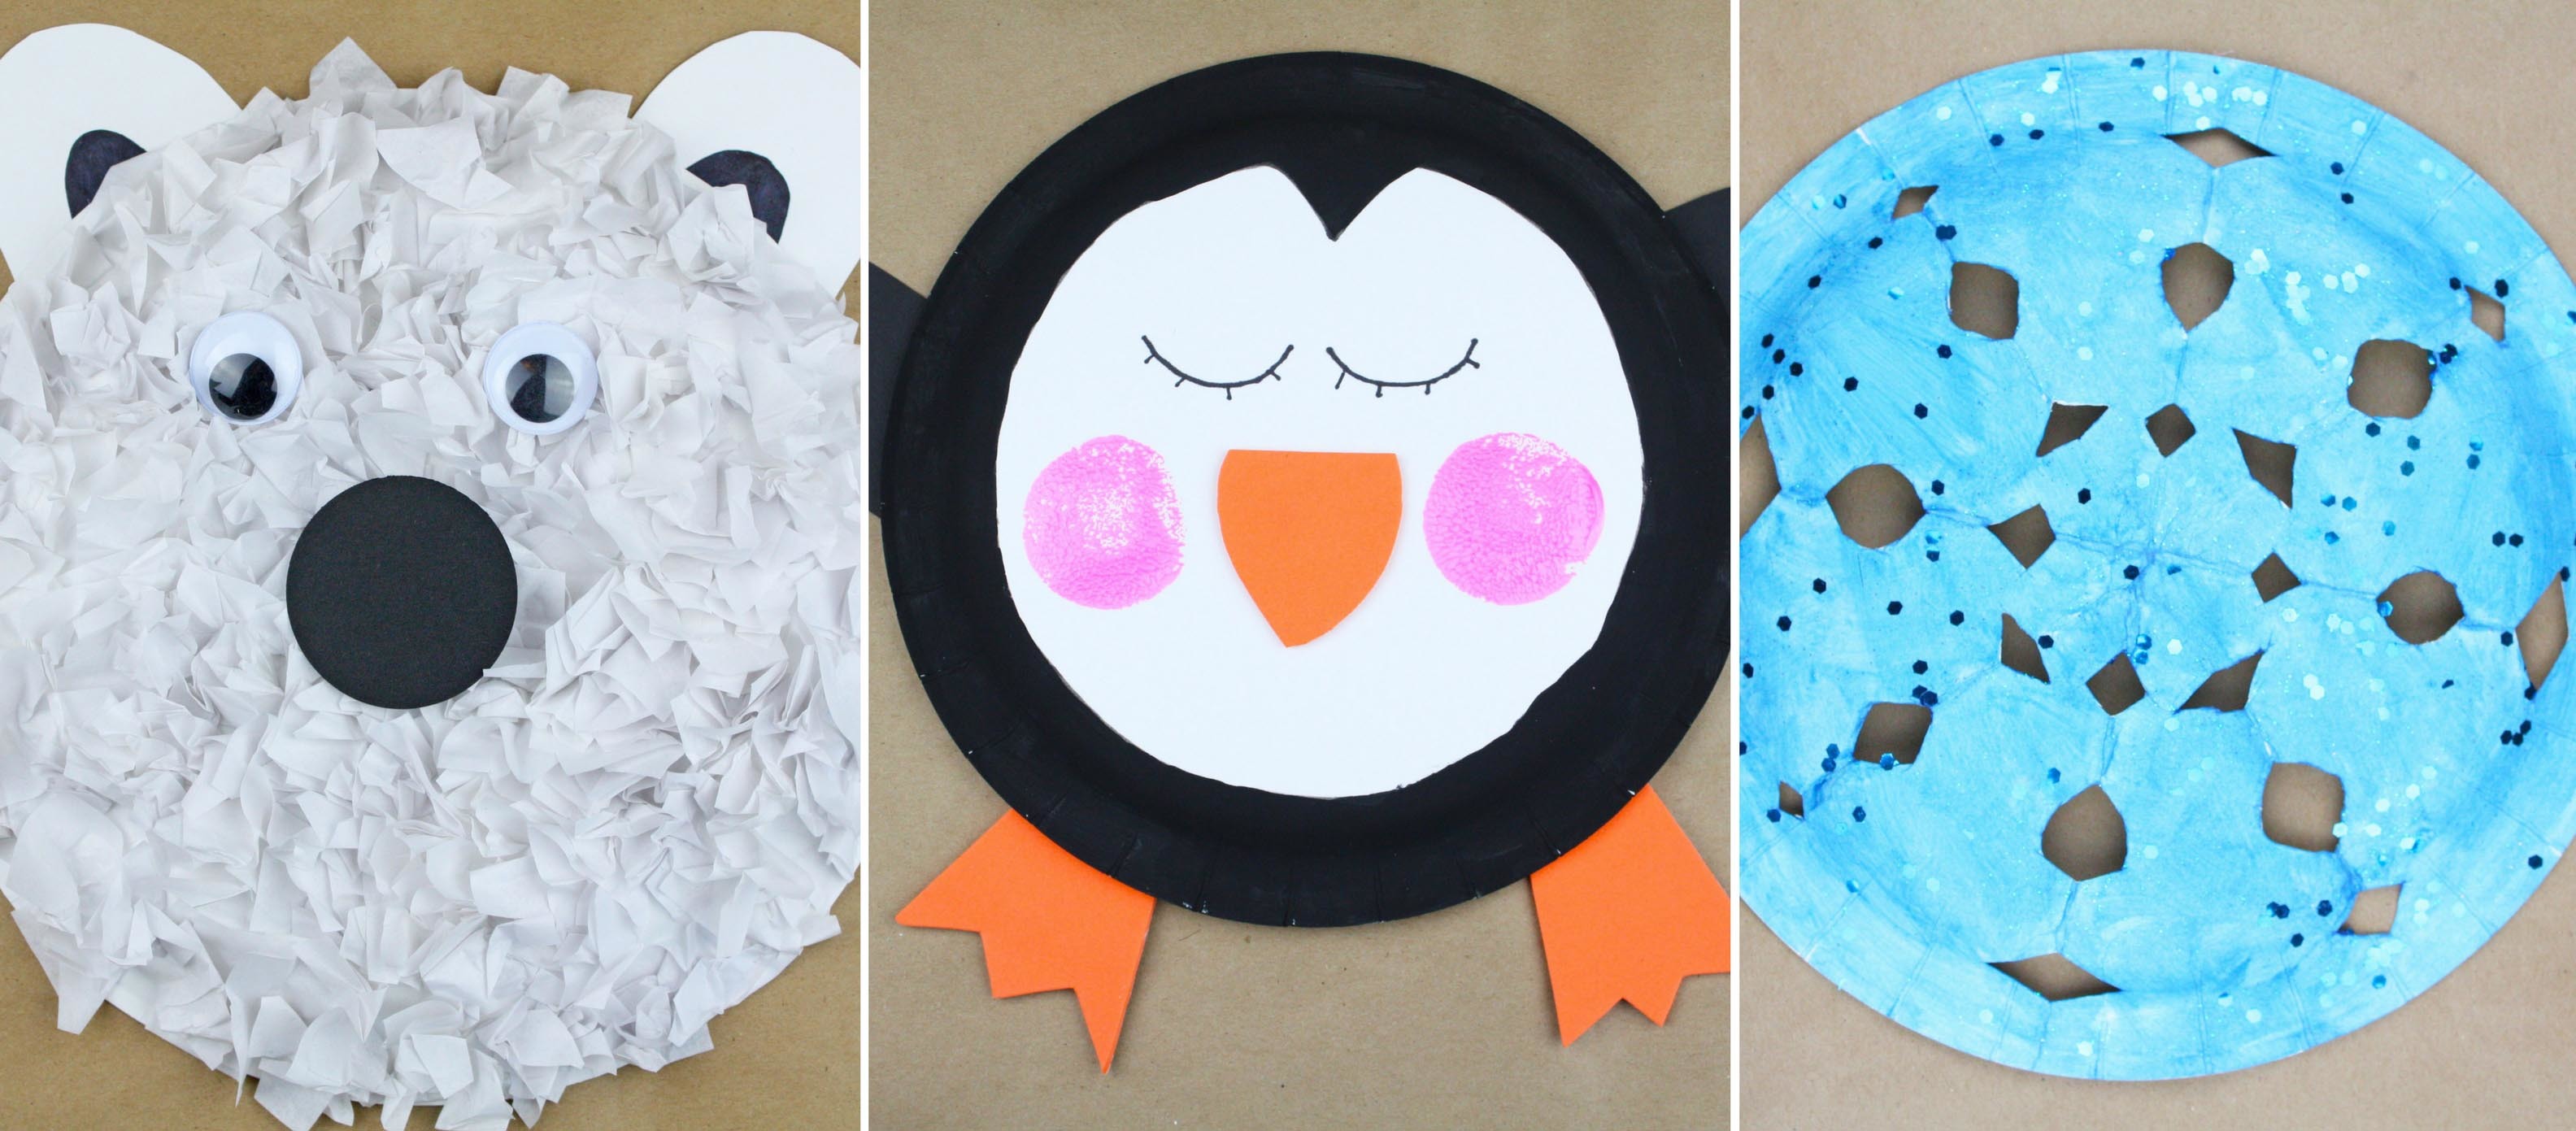 25 Easy Paper Plate Winter Crafts For Kids To Make  Winter animal crafts, Winter  crafts preschool, Winter crafts